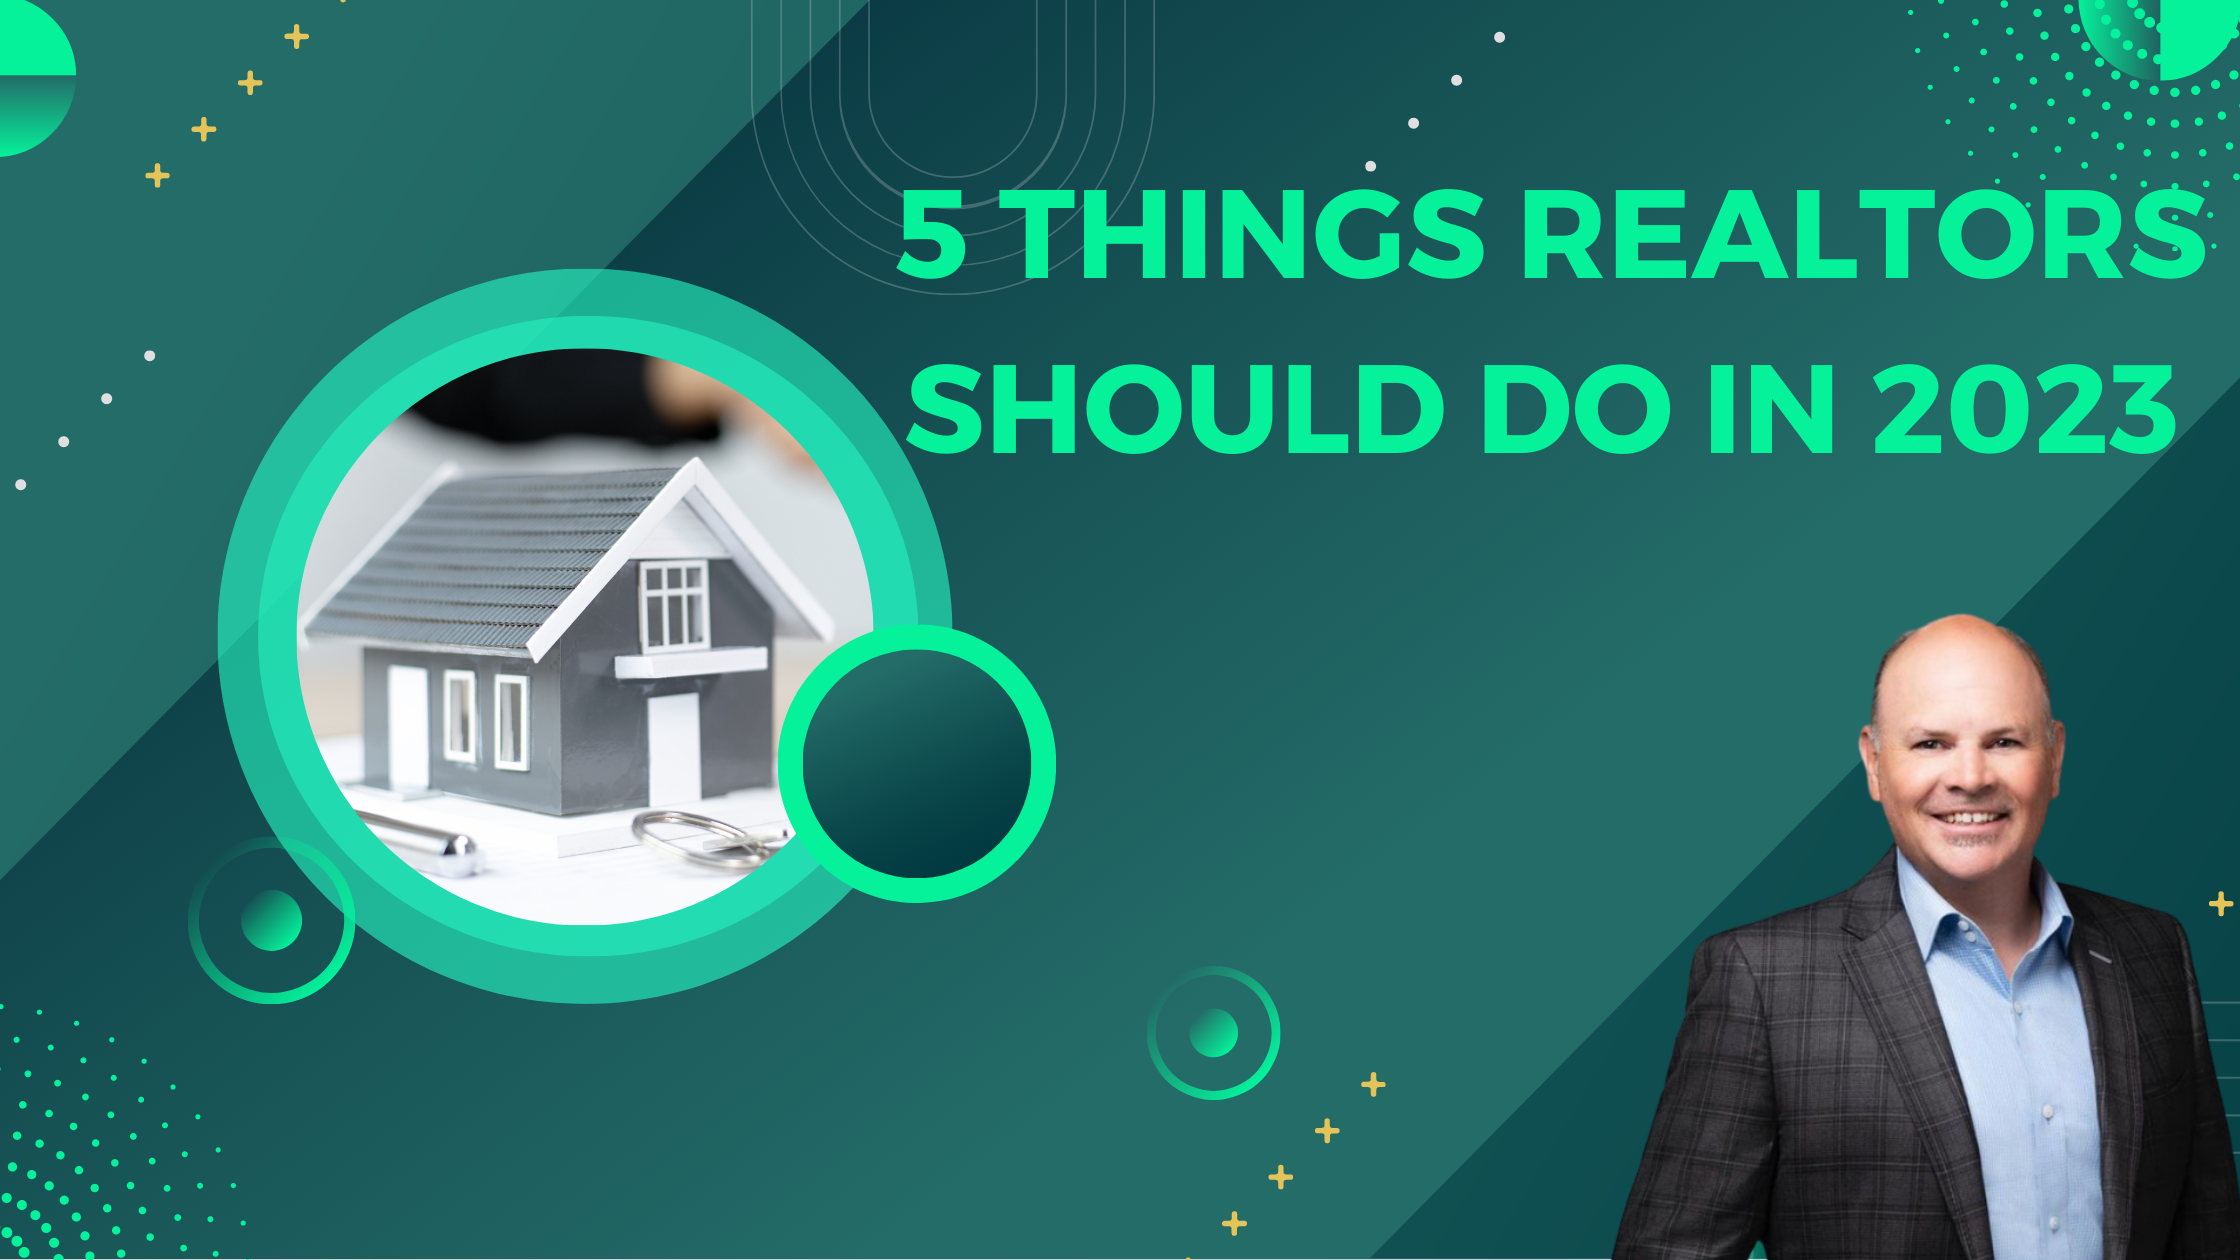 Real Estate Coaching - 5 Things Realtors Should Do in 2023 - Aaron Zapata